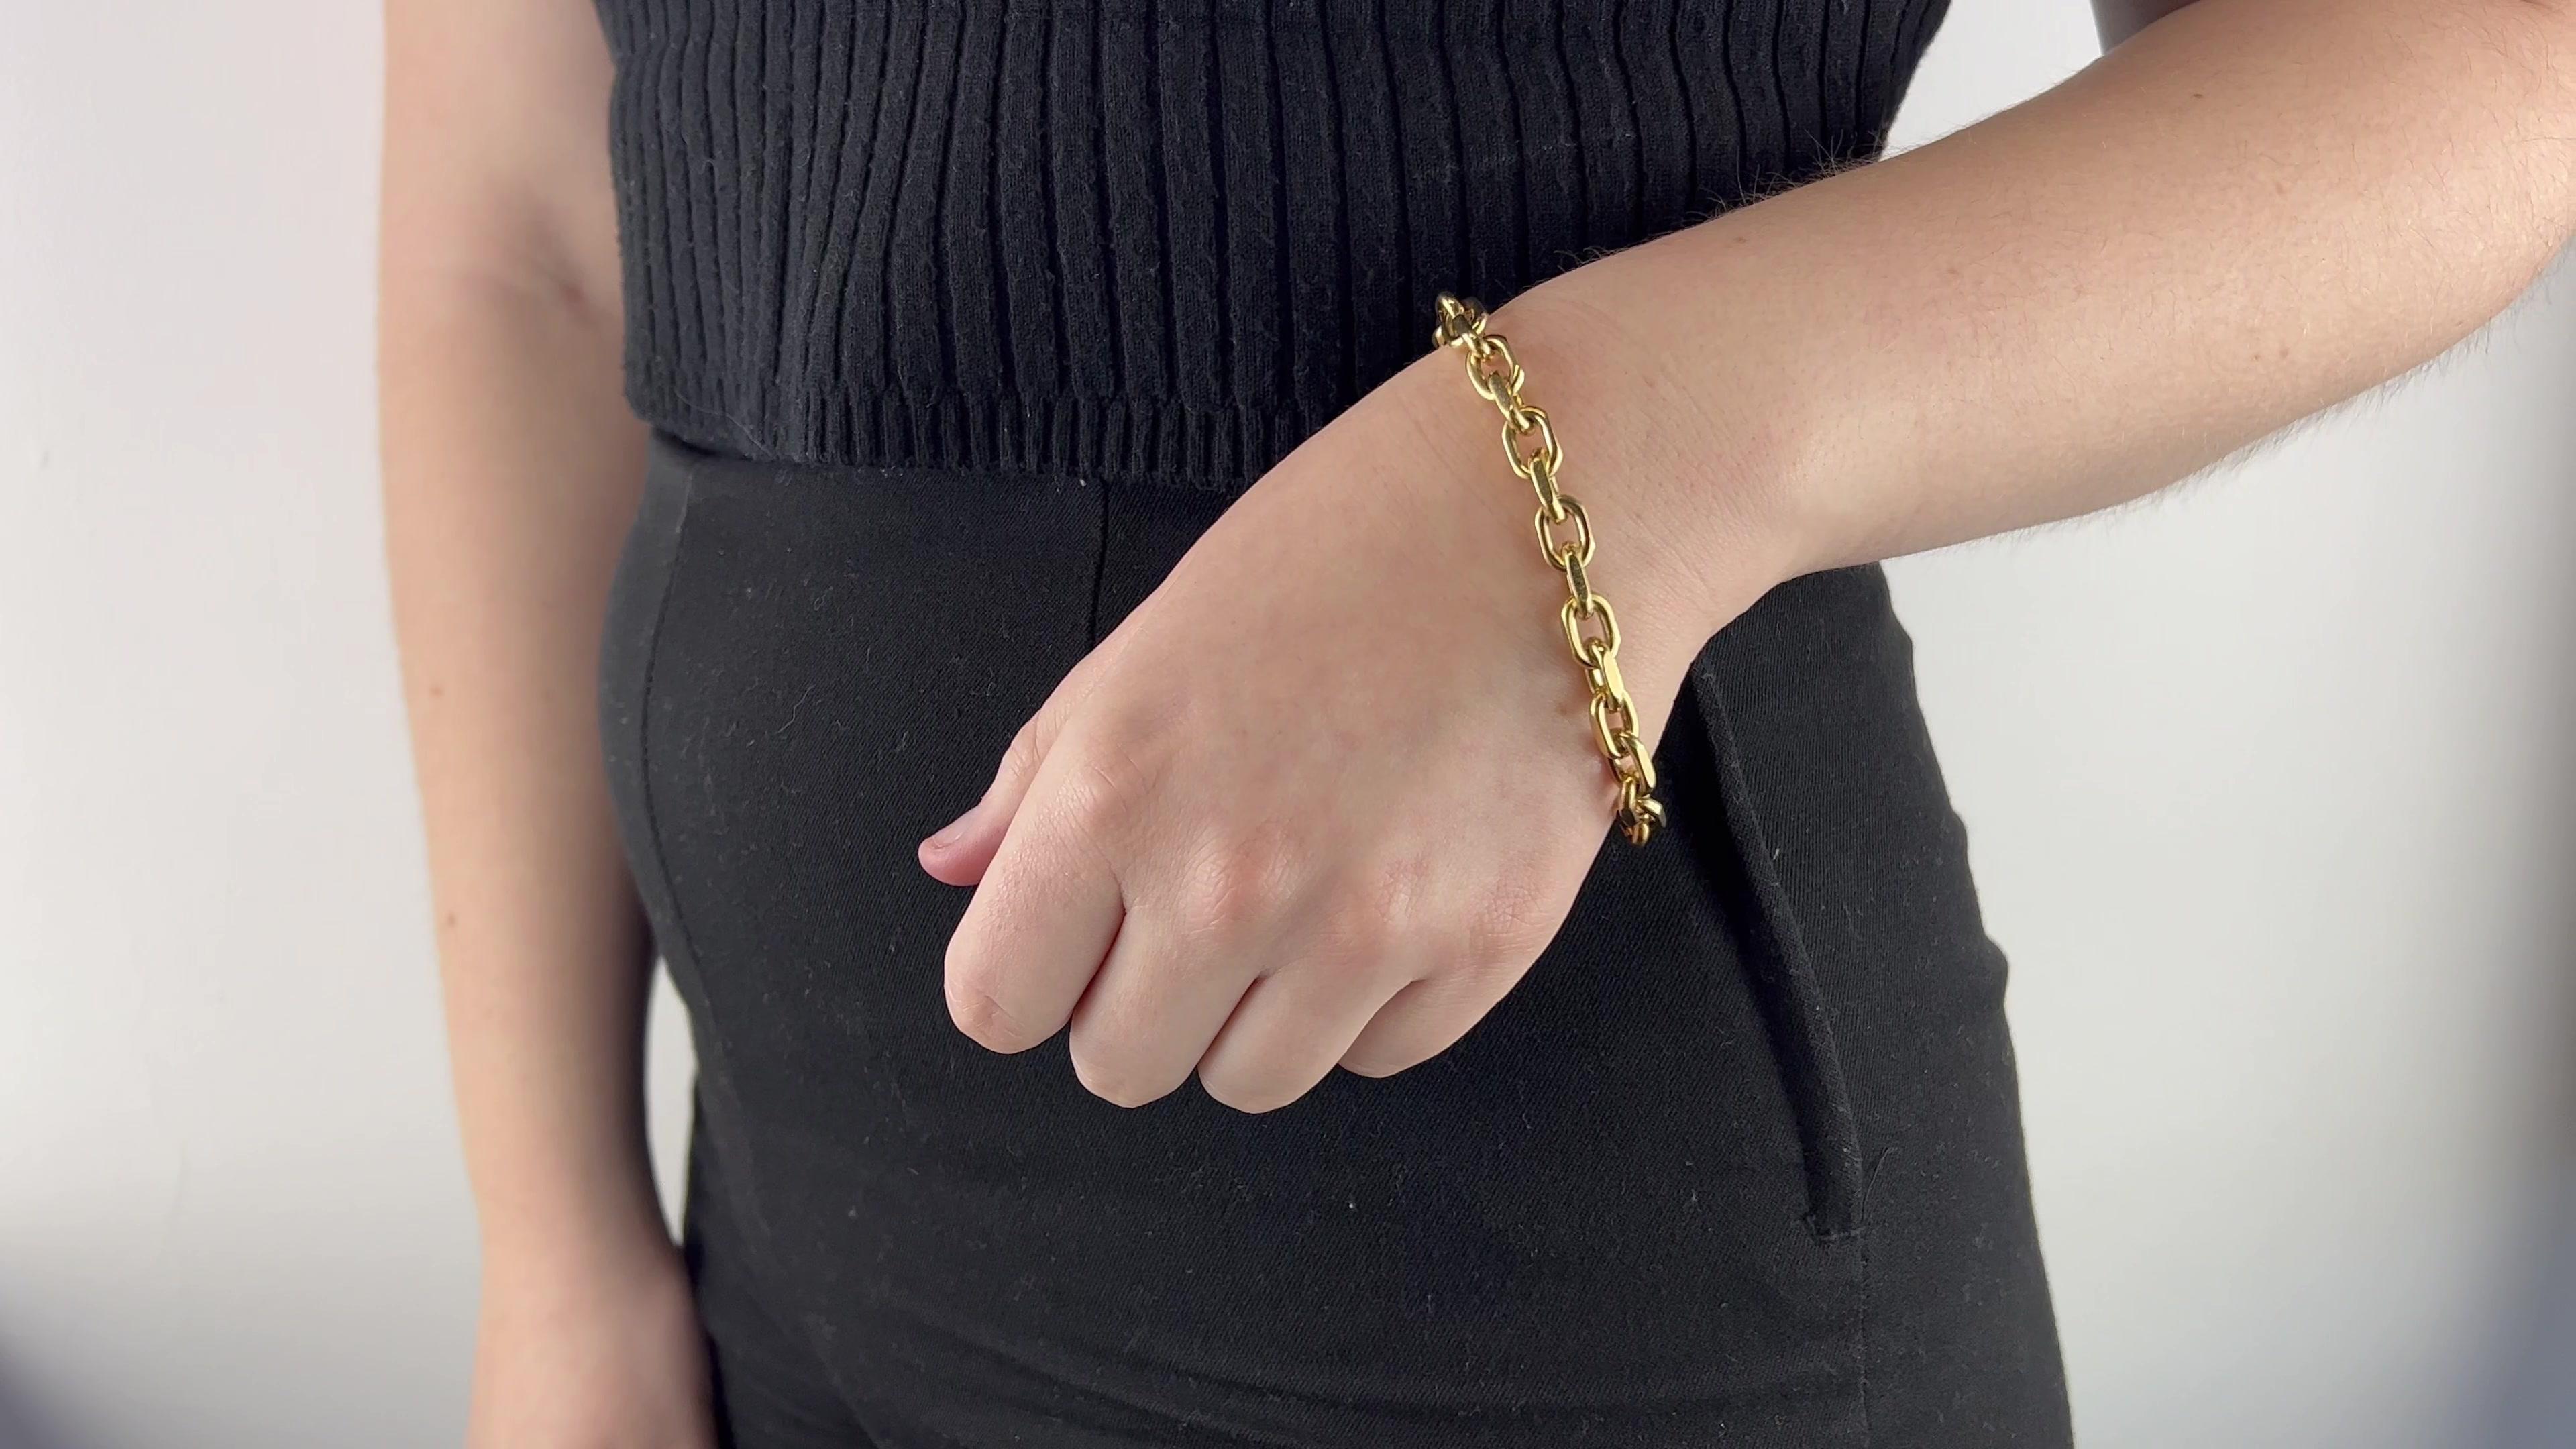 One Vintage 18 Karat Yellow Gold Cable Chain Bracelet. Crafted in 18 karat yellow gold with purity marks. Circa 1970s. The bracelet measures 8 inches in length. 

About this Item: Looking for a chunky classic chain link bracelet? We have the perfect